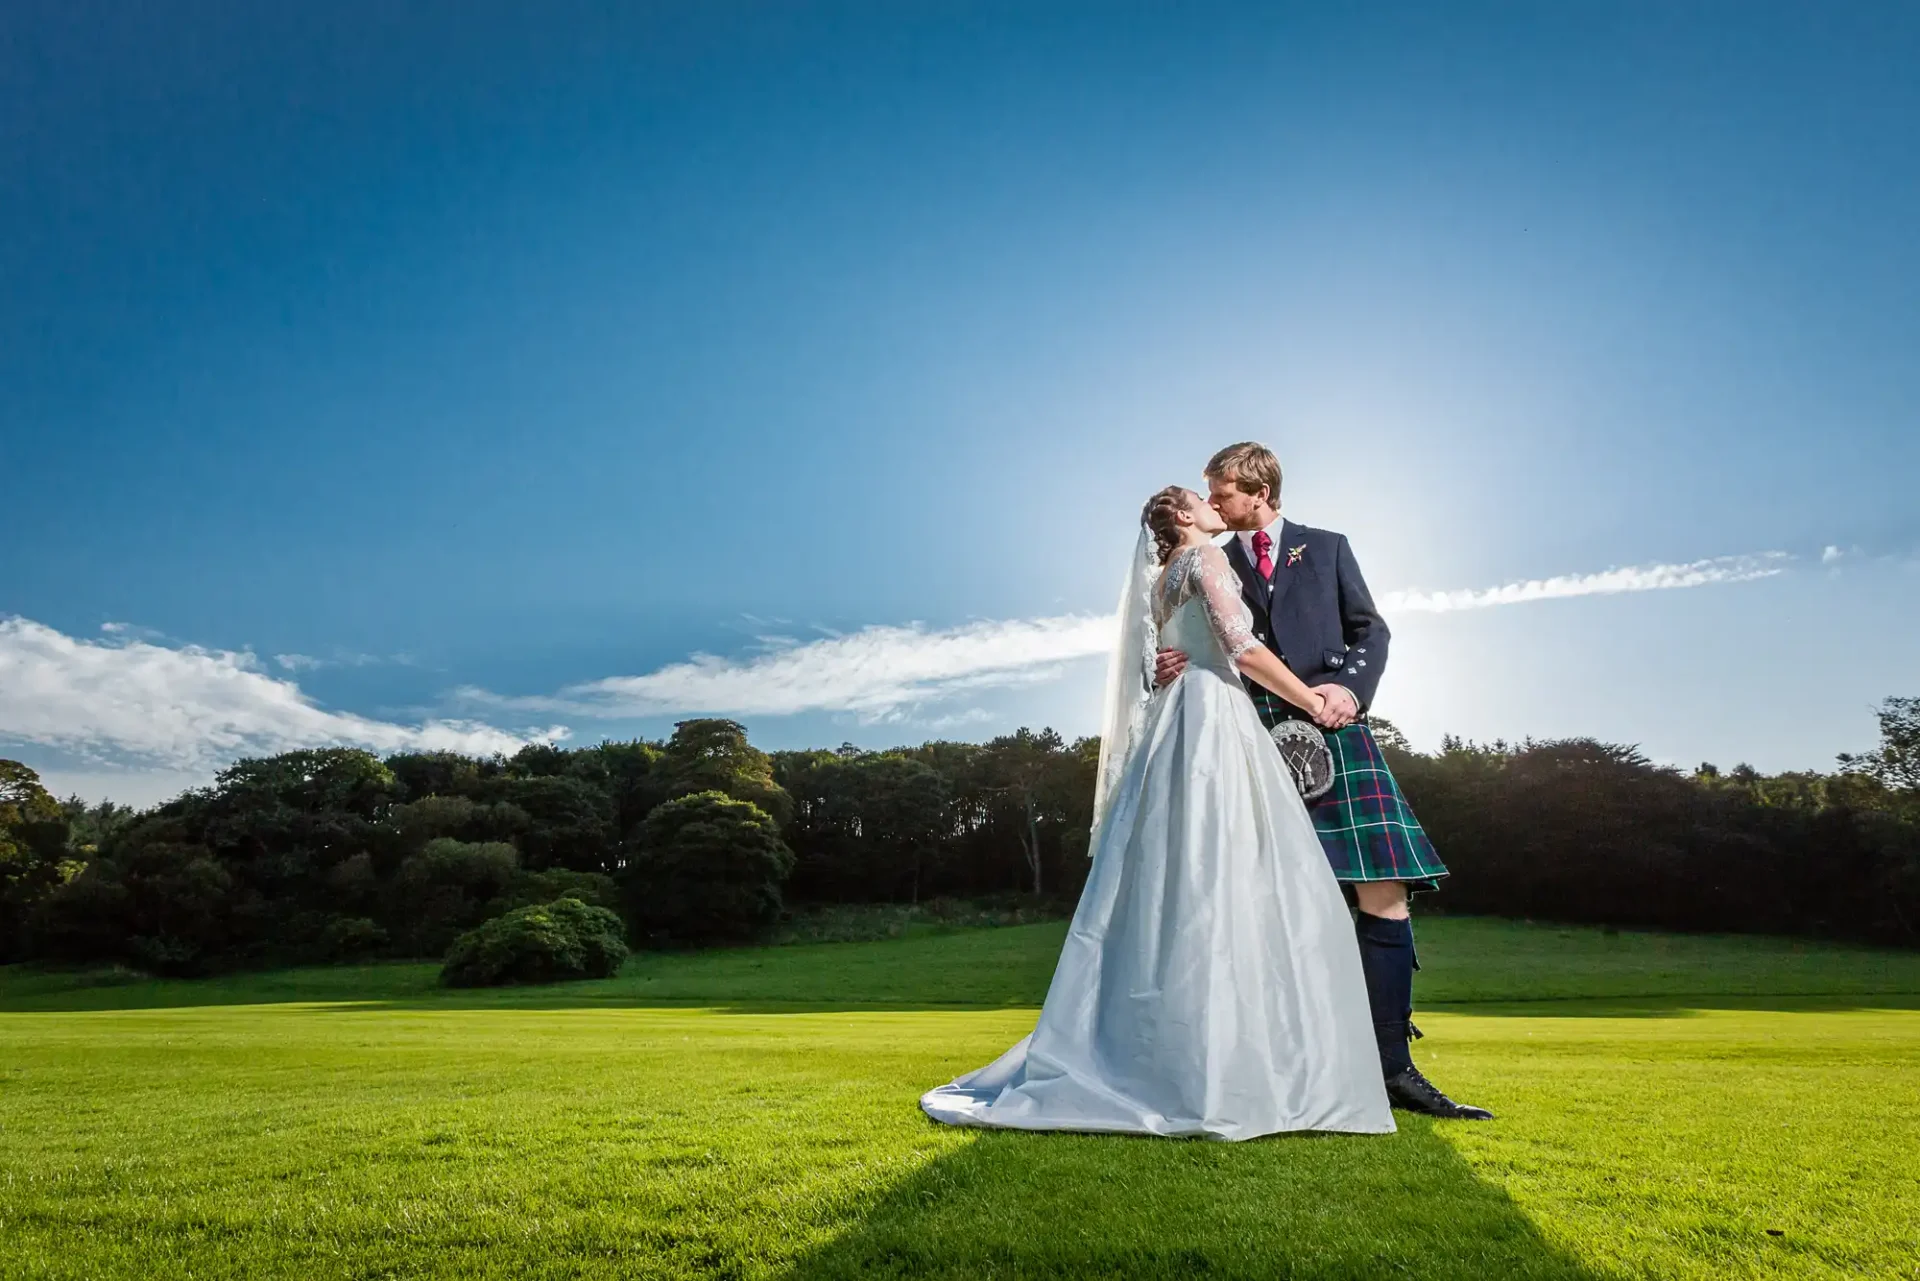 A bride and groom embracing on a sunny grassy field, the groom in a kilt and the bride in a long white gown, with a clear blue sky above.